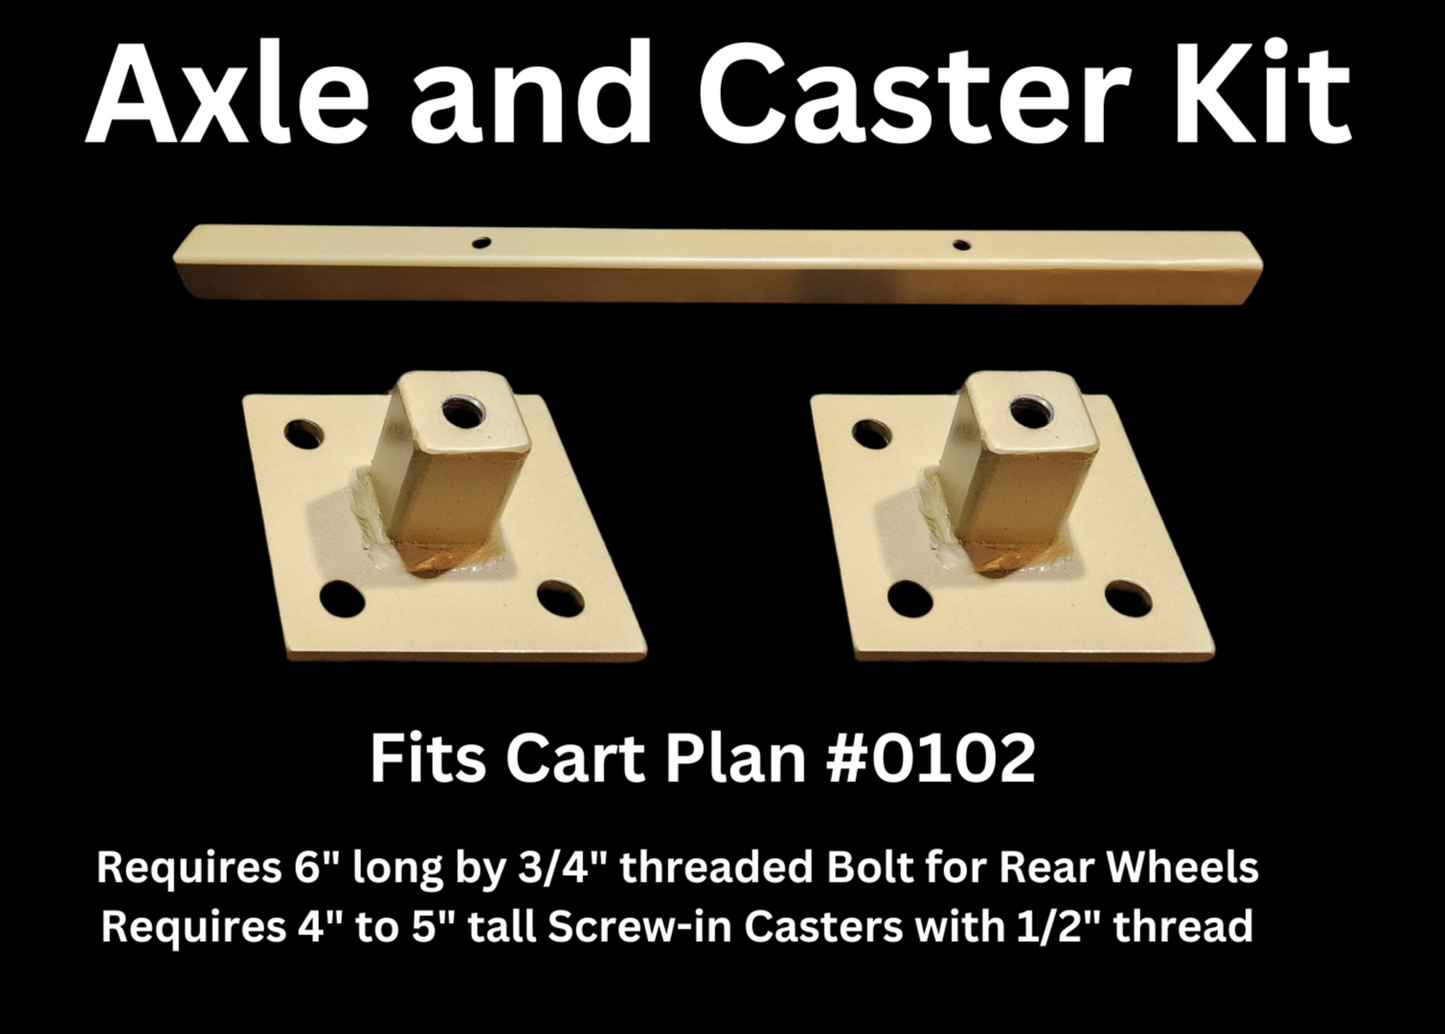 Wheel and Caster Kit for Plan #0102